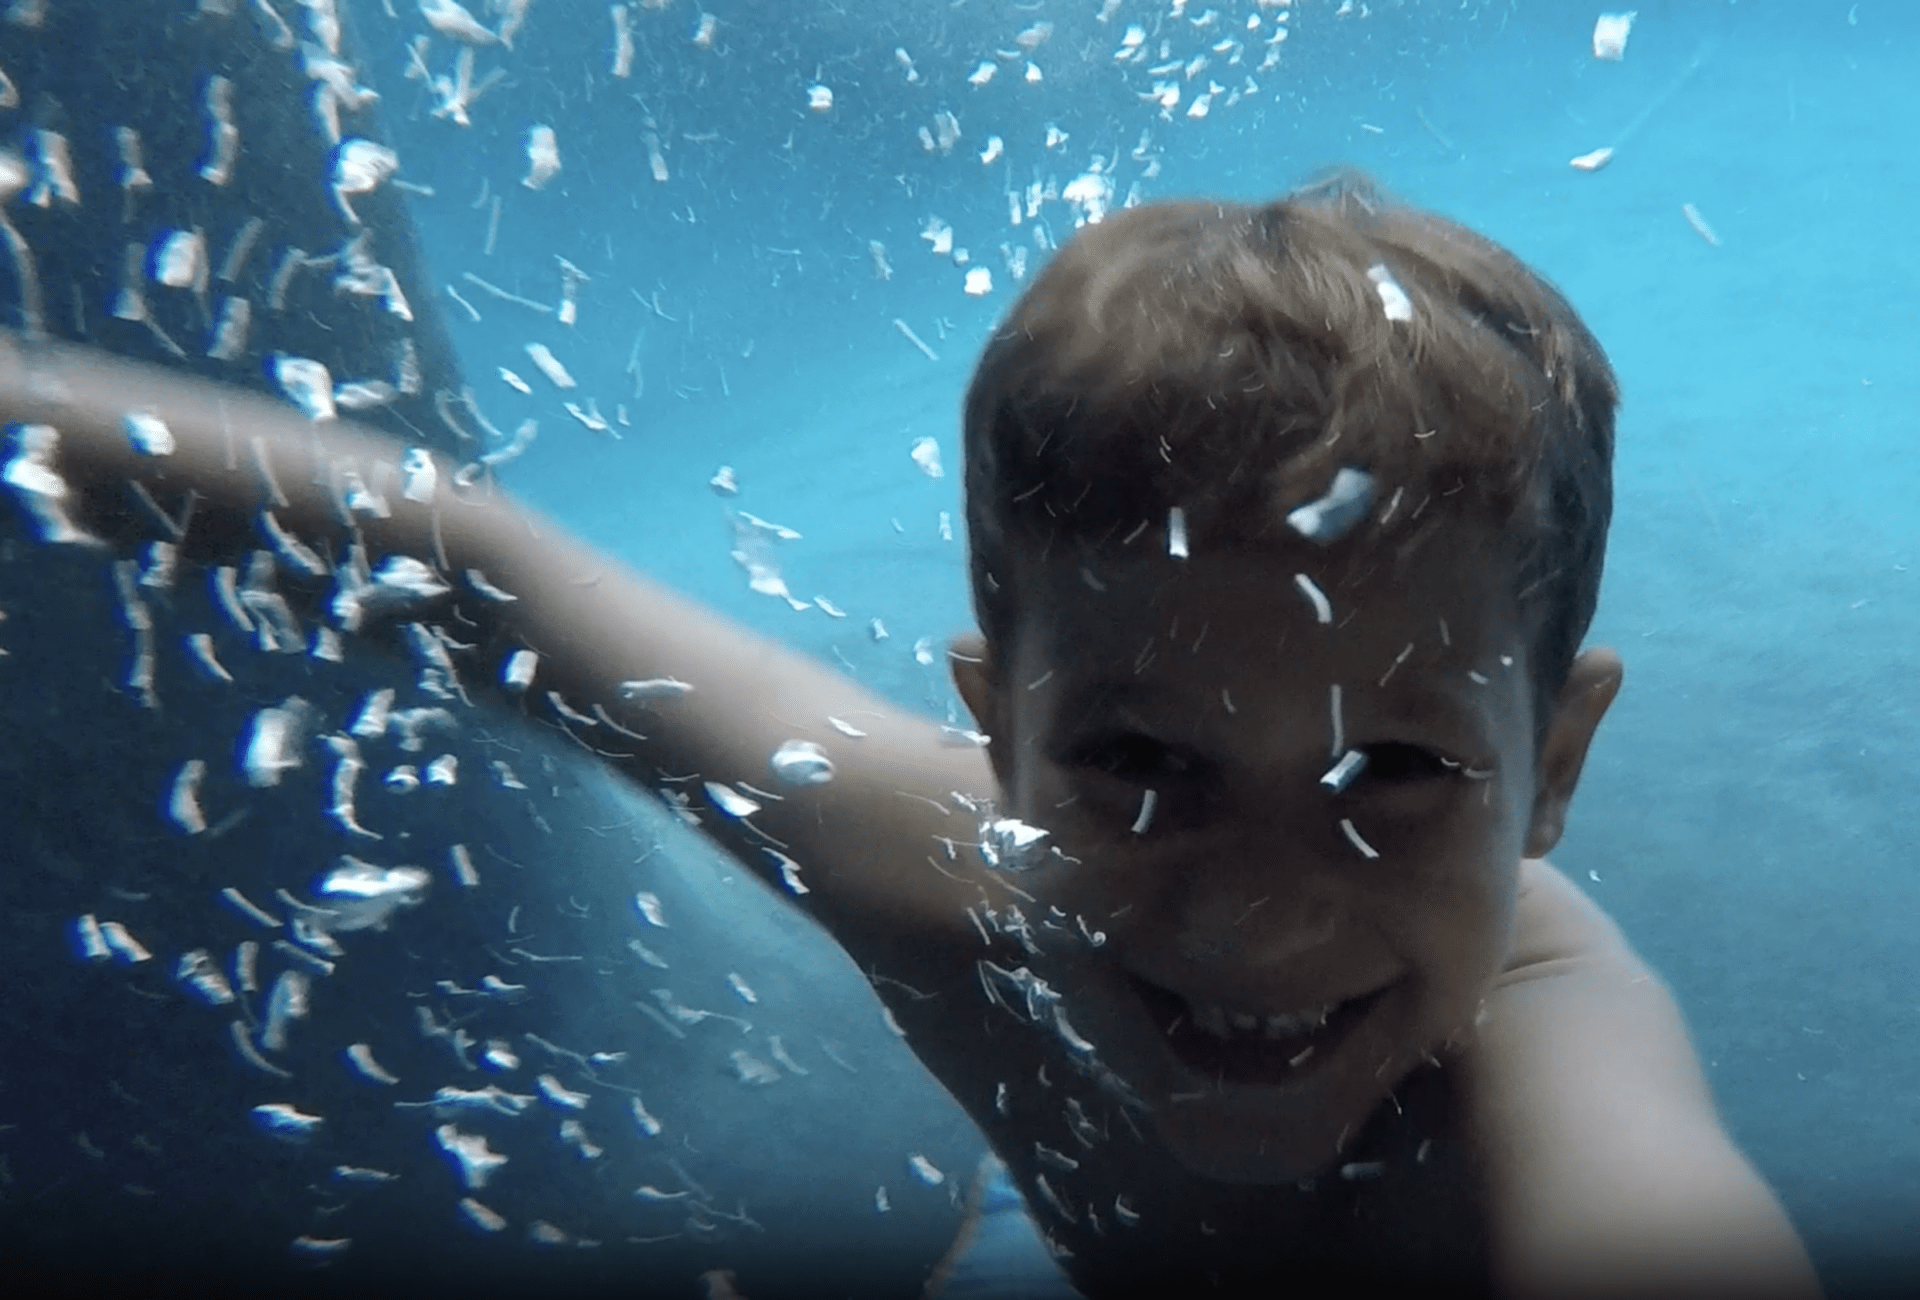 A smiling child is submerged in clear blue water, surrounded by bubbles, with a joyous expression visible through the water's distortion.